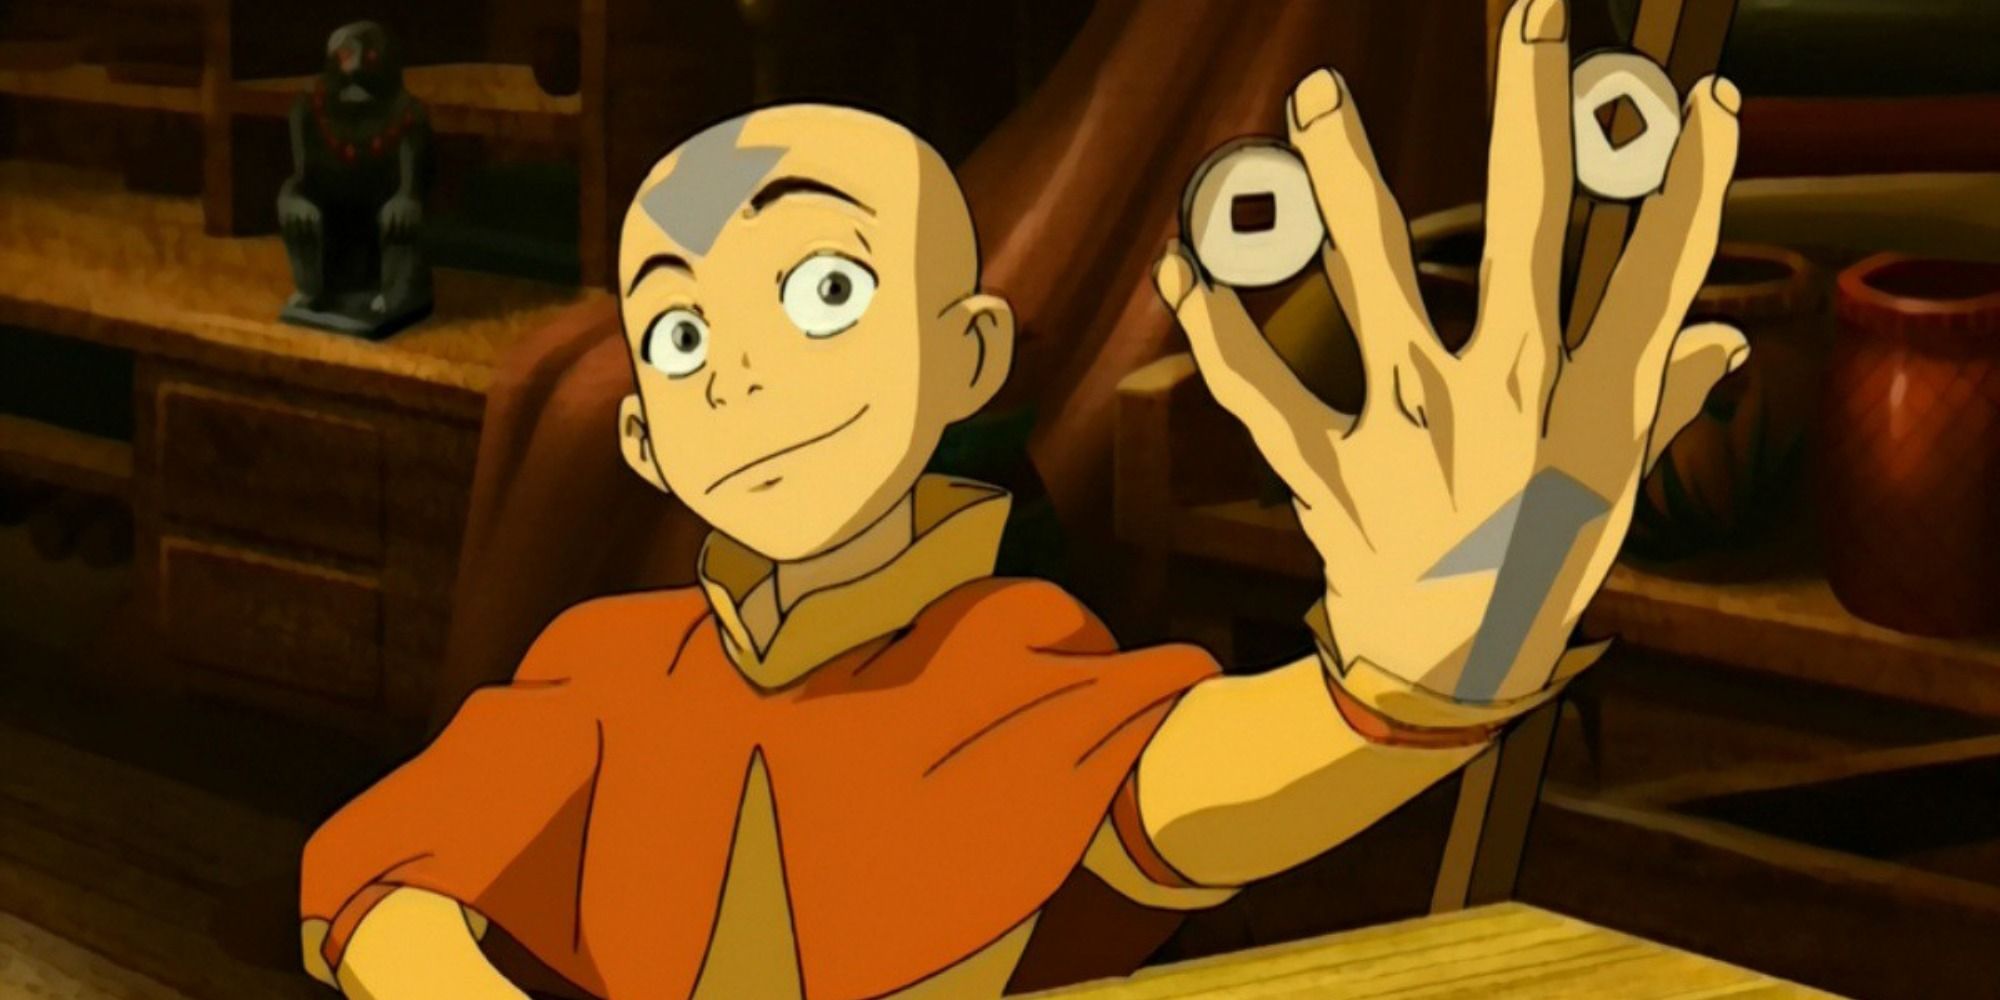 A profile screenshot of Aang from Avatar: The Last Airbender